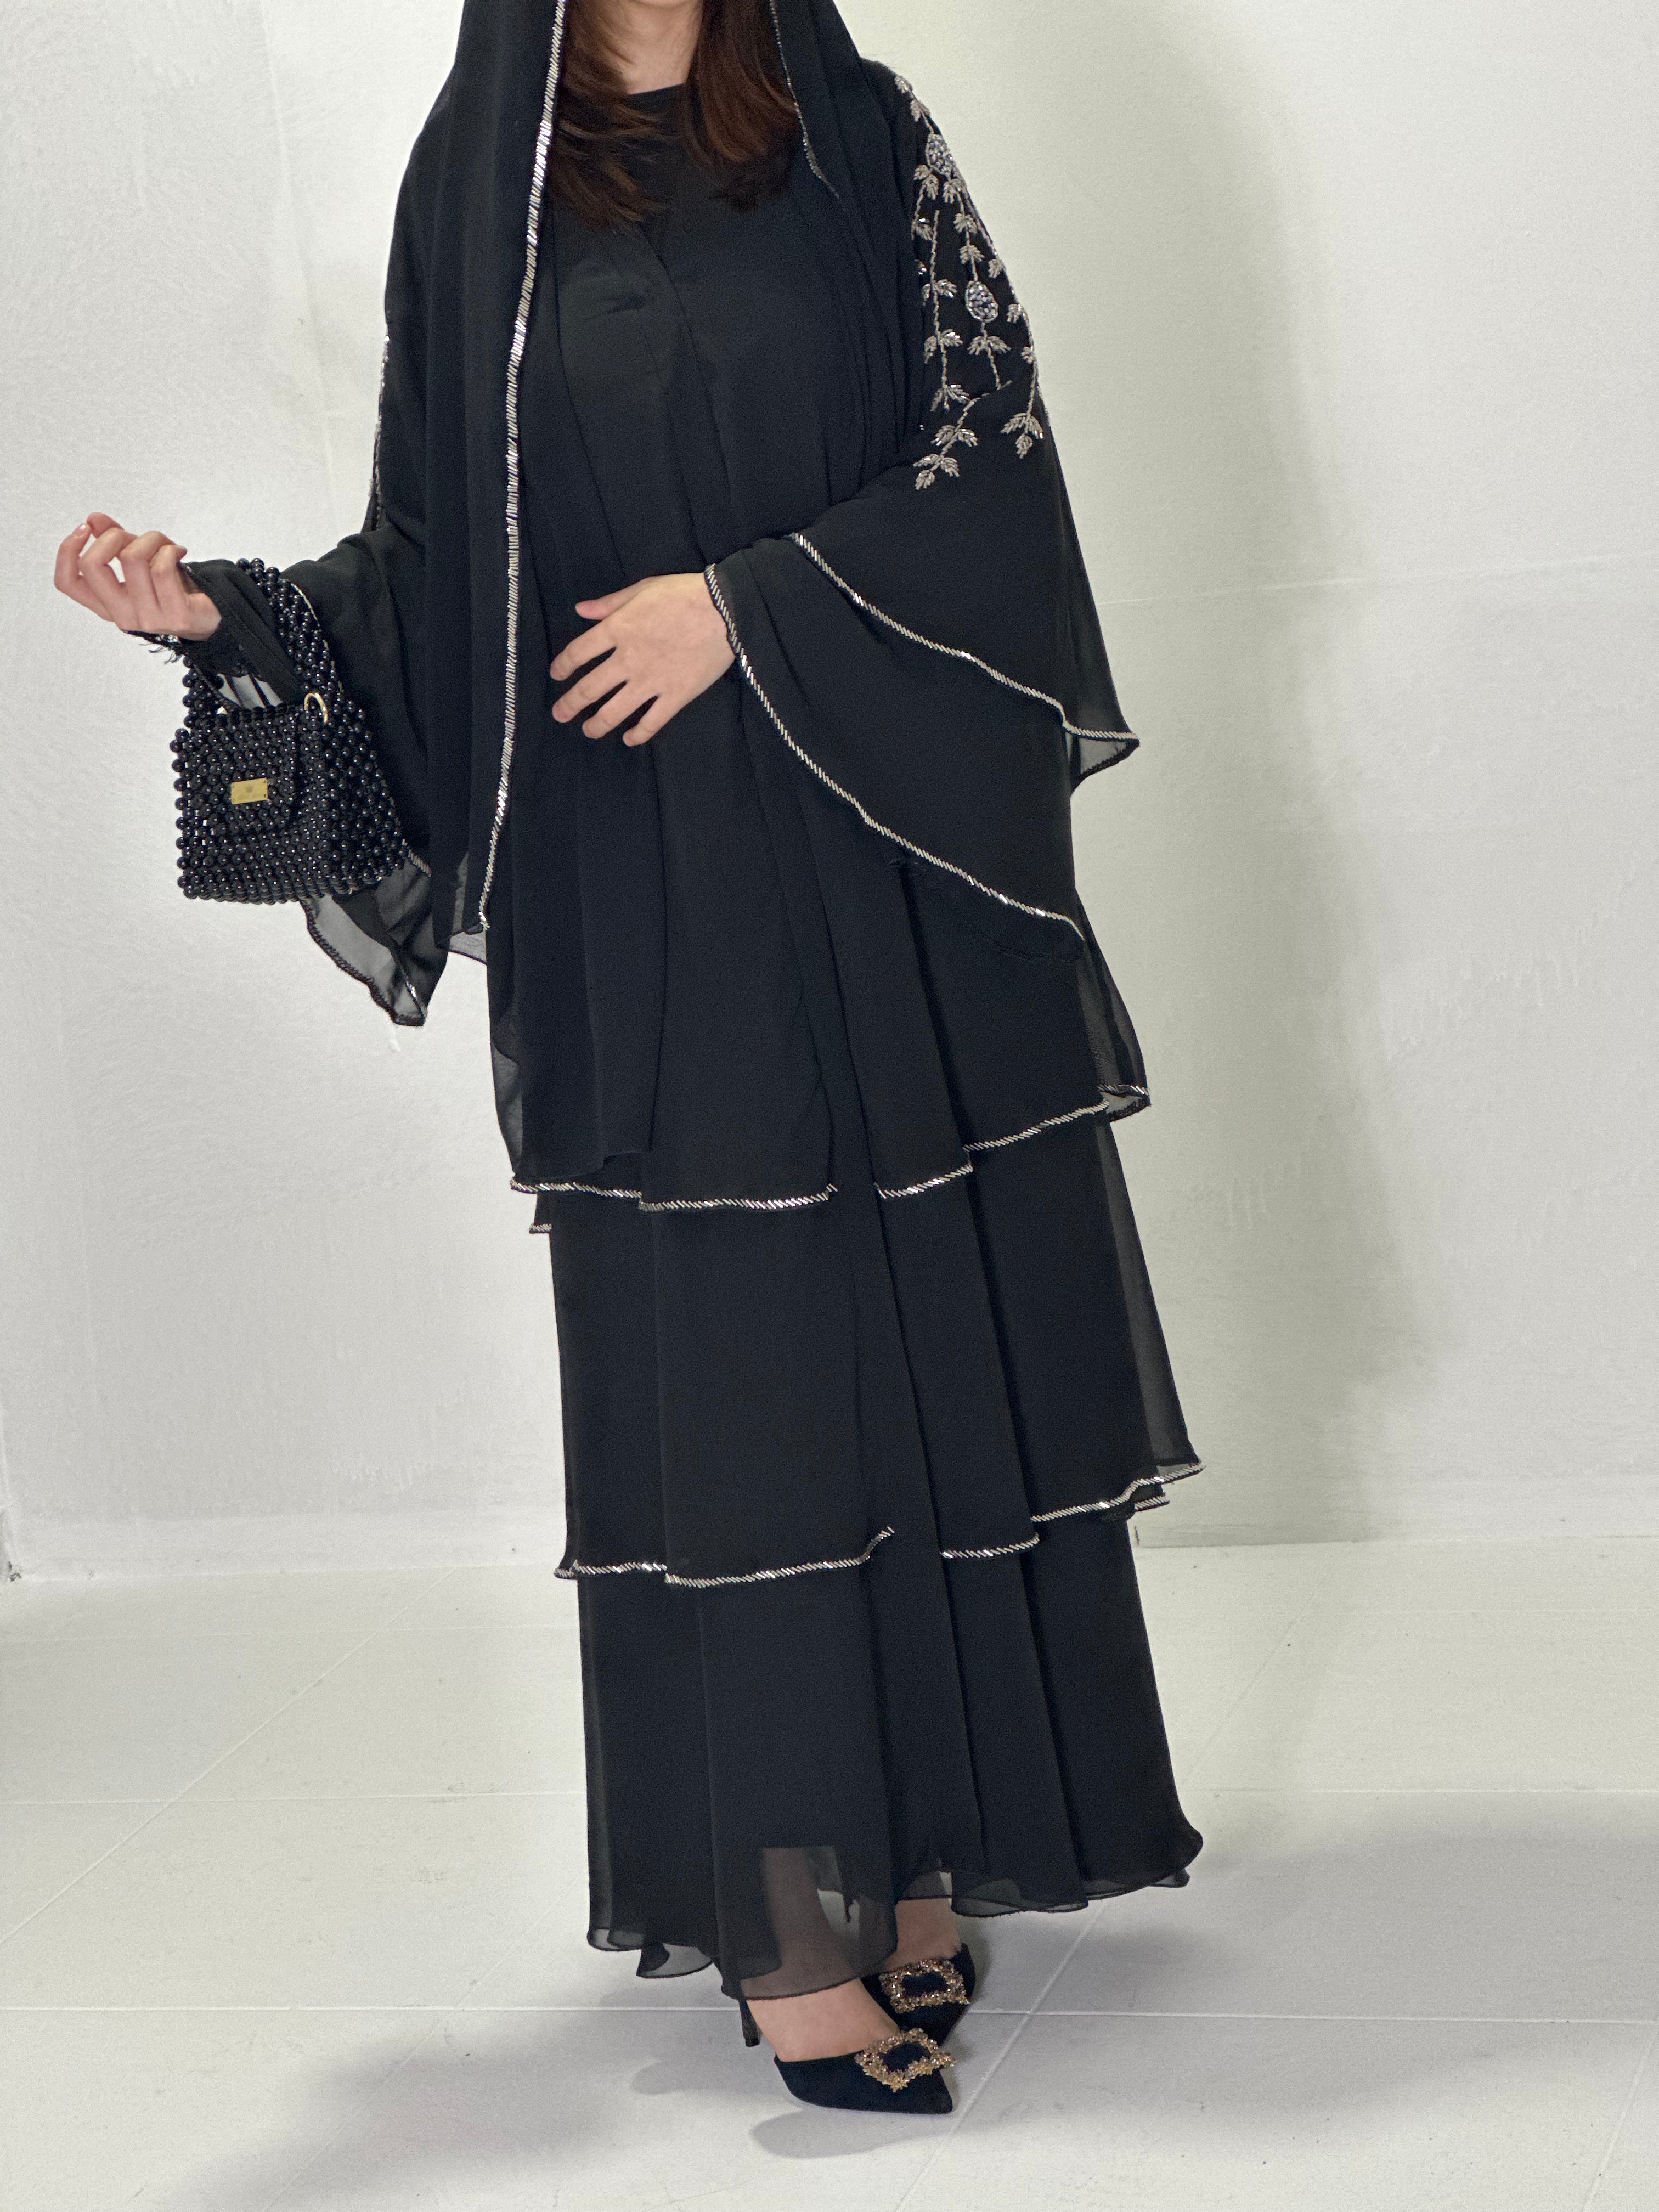 Beautiful and elegance Black abaya with white embroidery